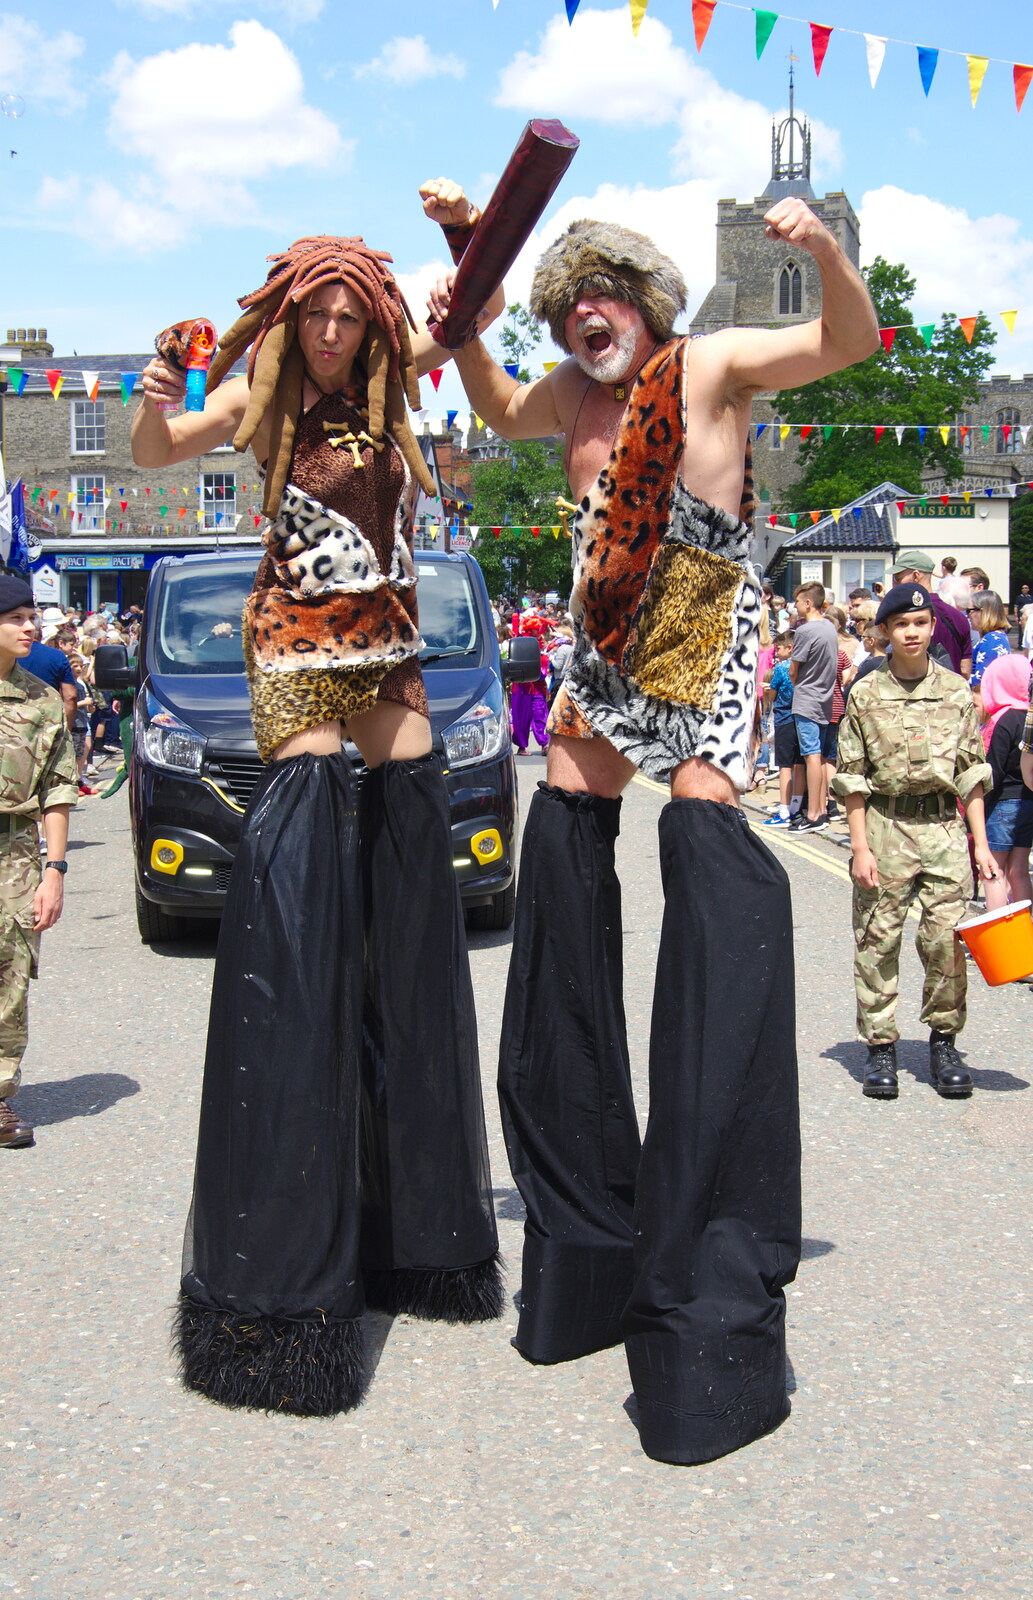 A couple of cave-people in stilts from The Diss Carnival 2019, Diss, Norfolk - 9th June 2019